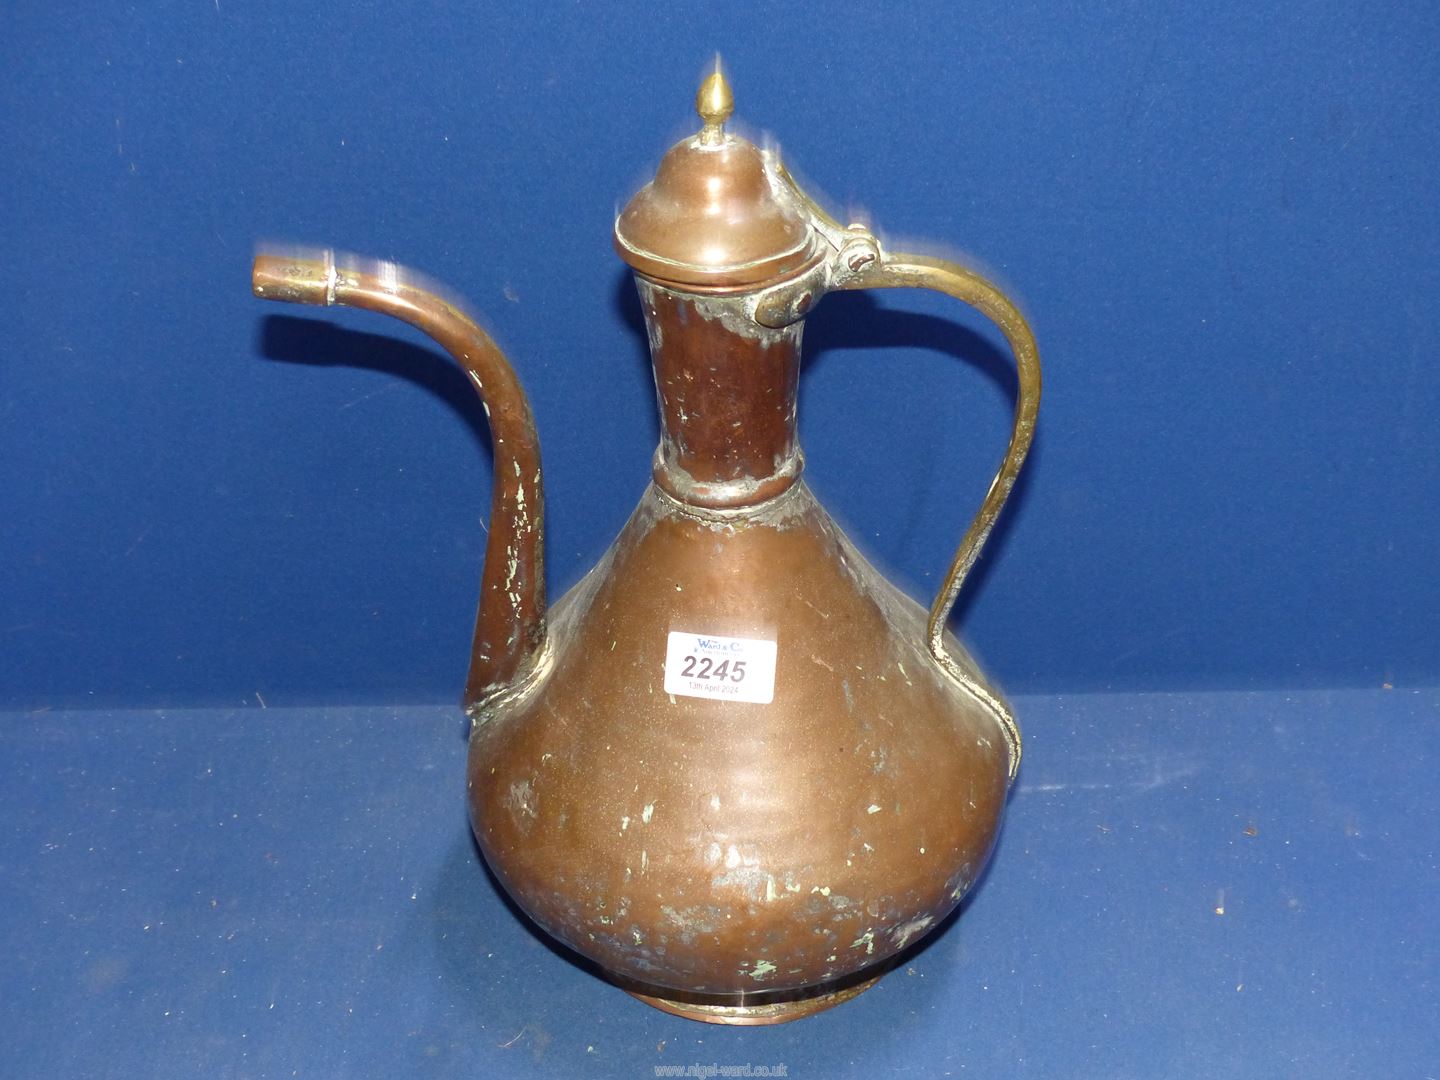 A large copper kettle in middle Eastern design, 14" tall.